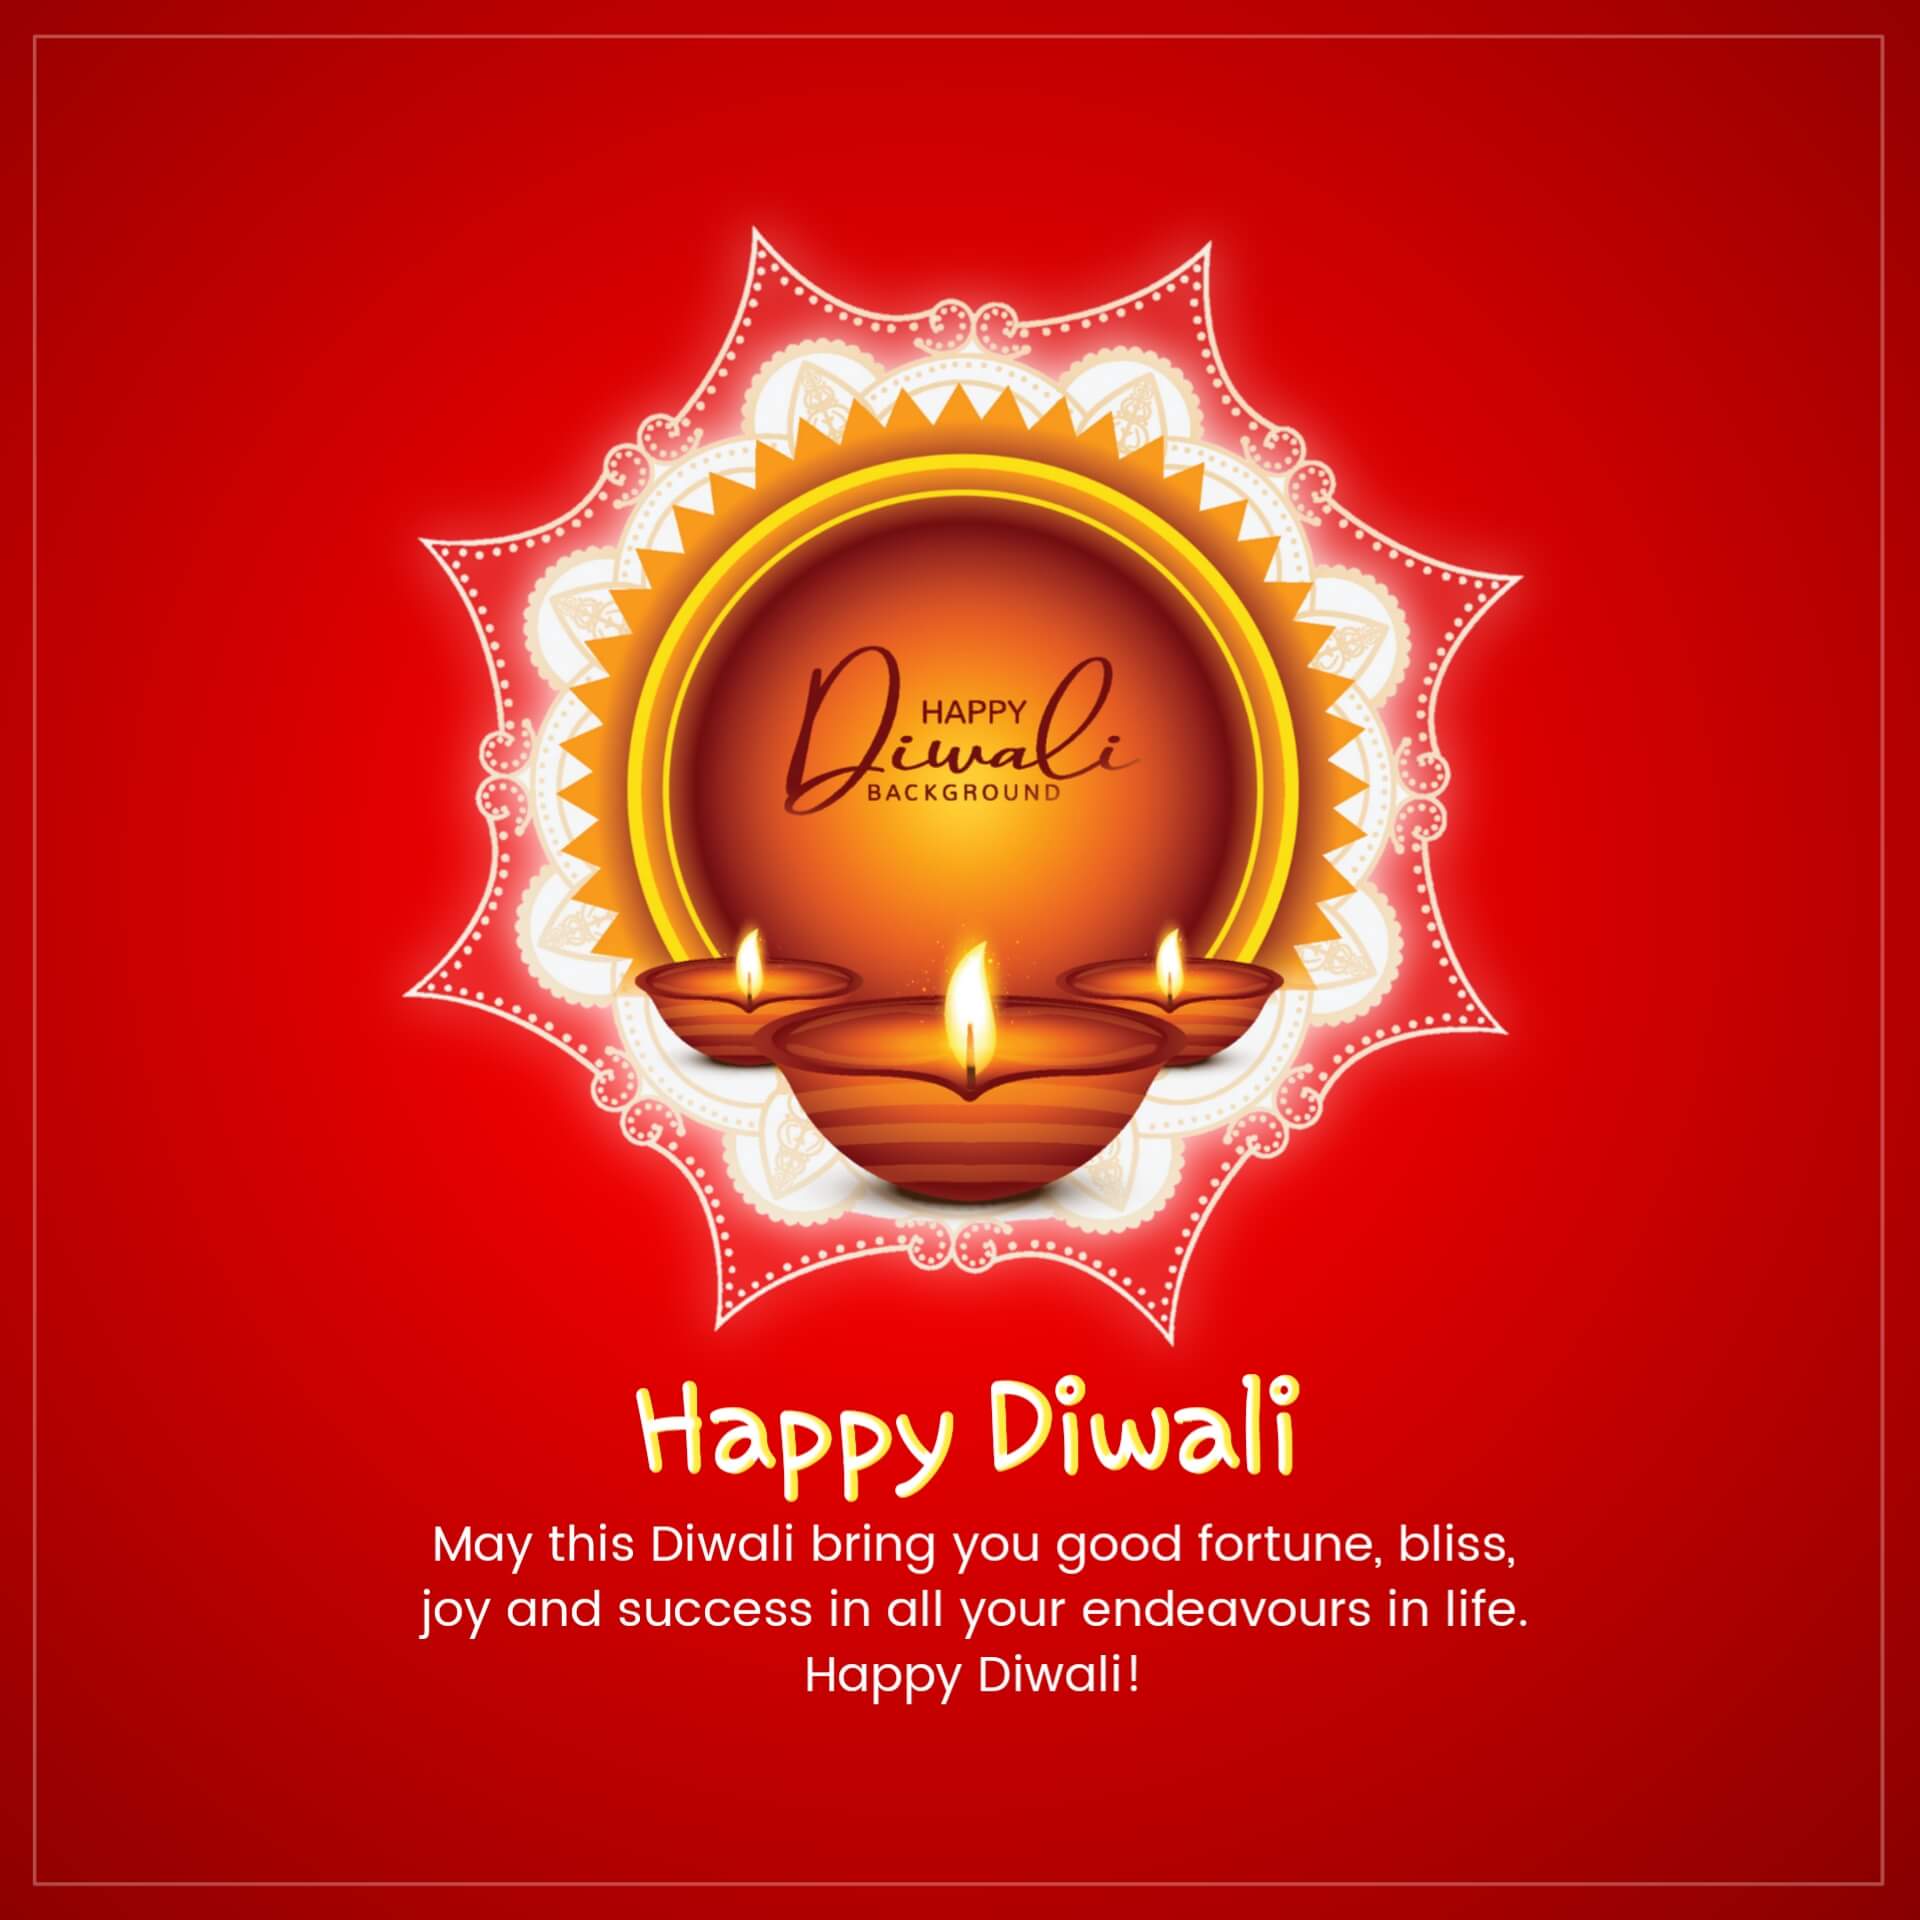 FREE) Diwali Wishes Logo - Free After Effects Templates (Official Site) -  Videohive projects